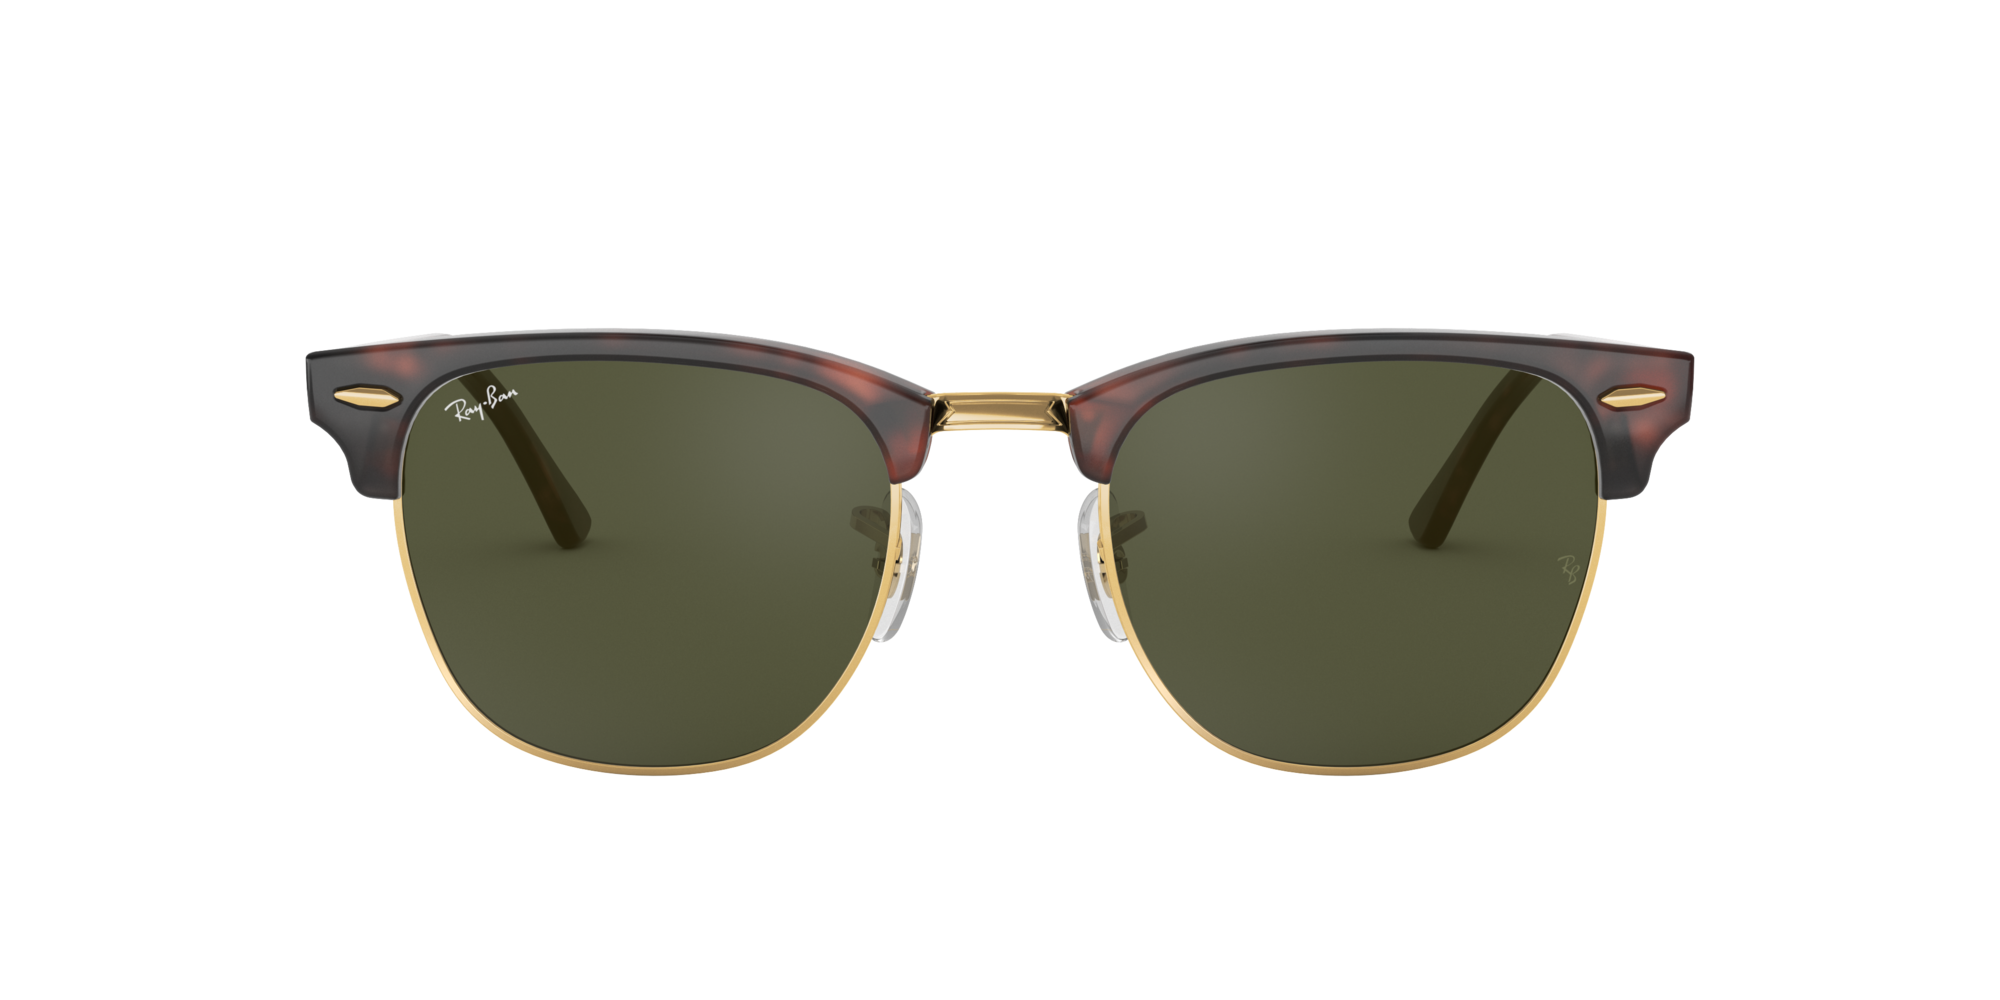 ray ban rb3016 classic clubmaster sunglasses